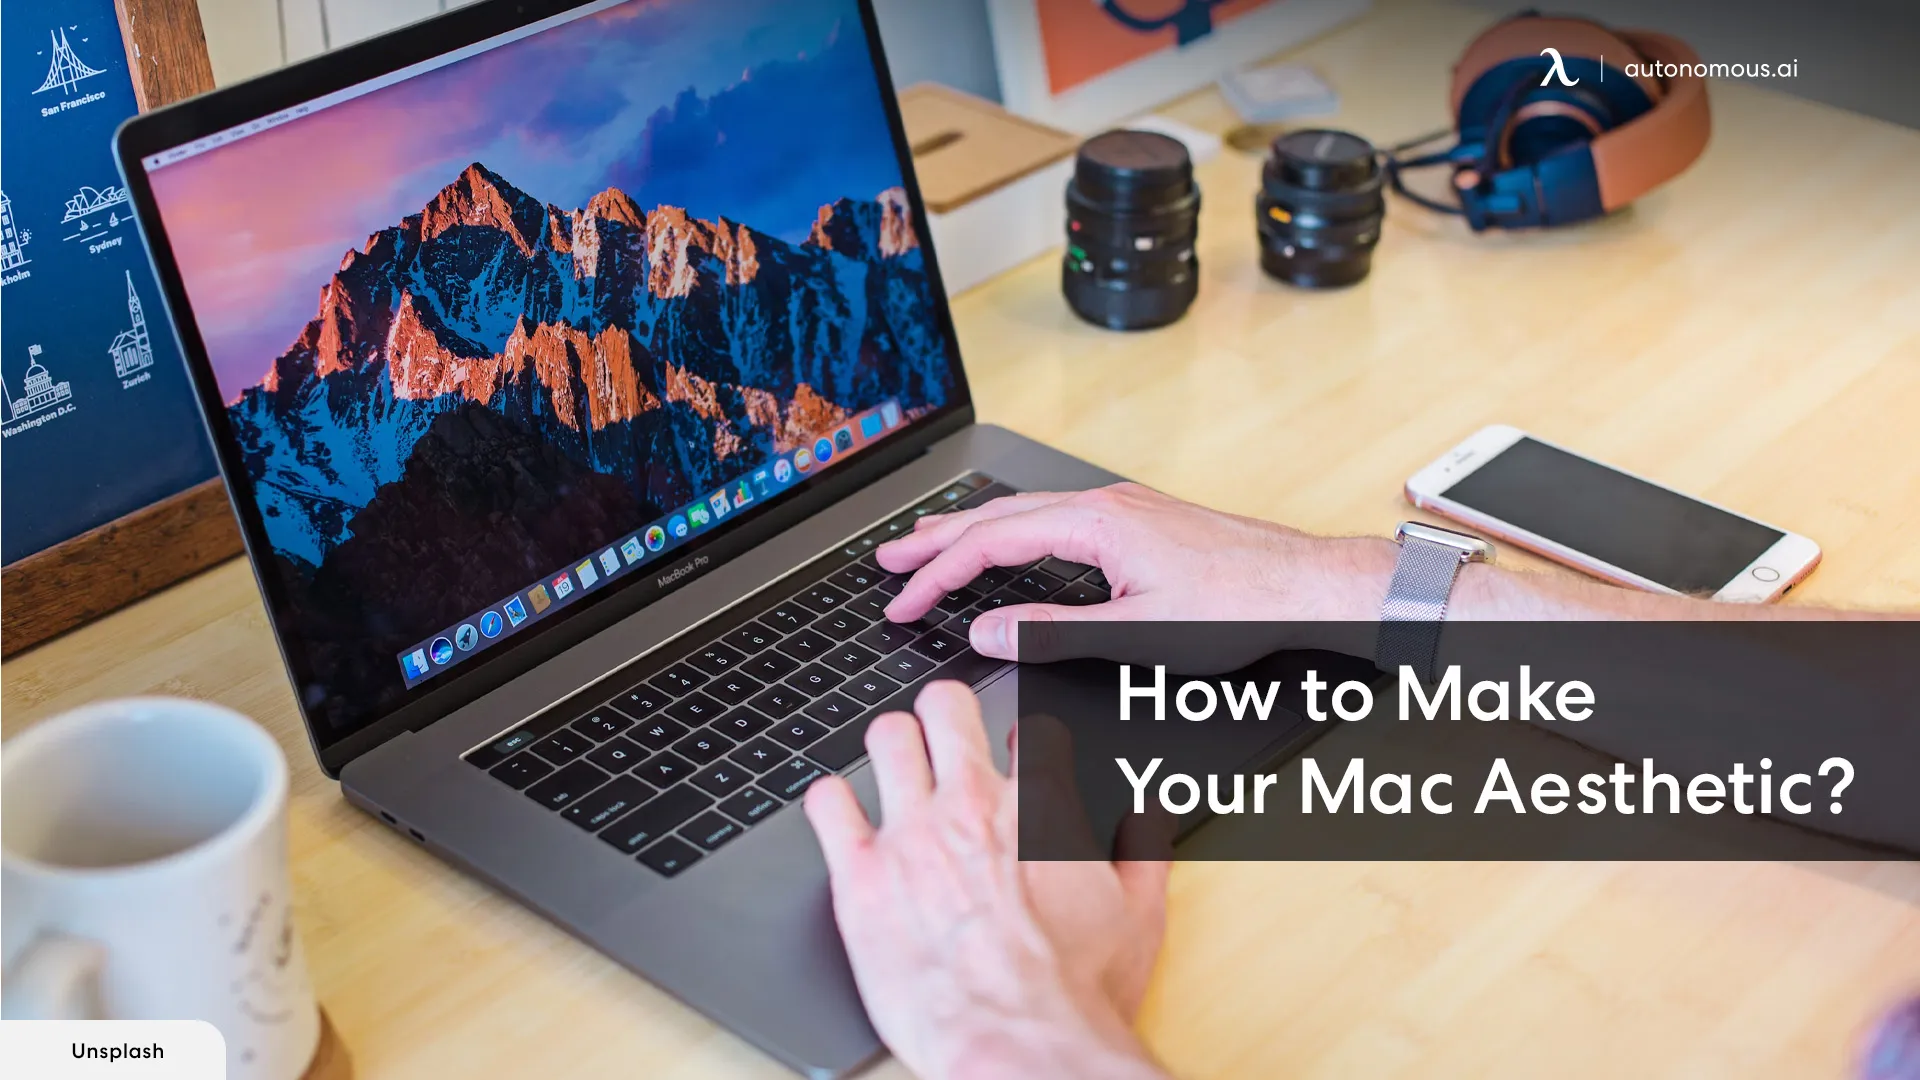 A Comprehensive Guide on How to Make Your Mac Aesthetic